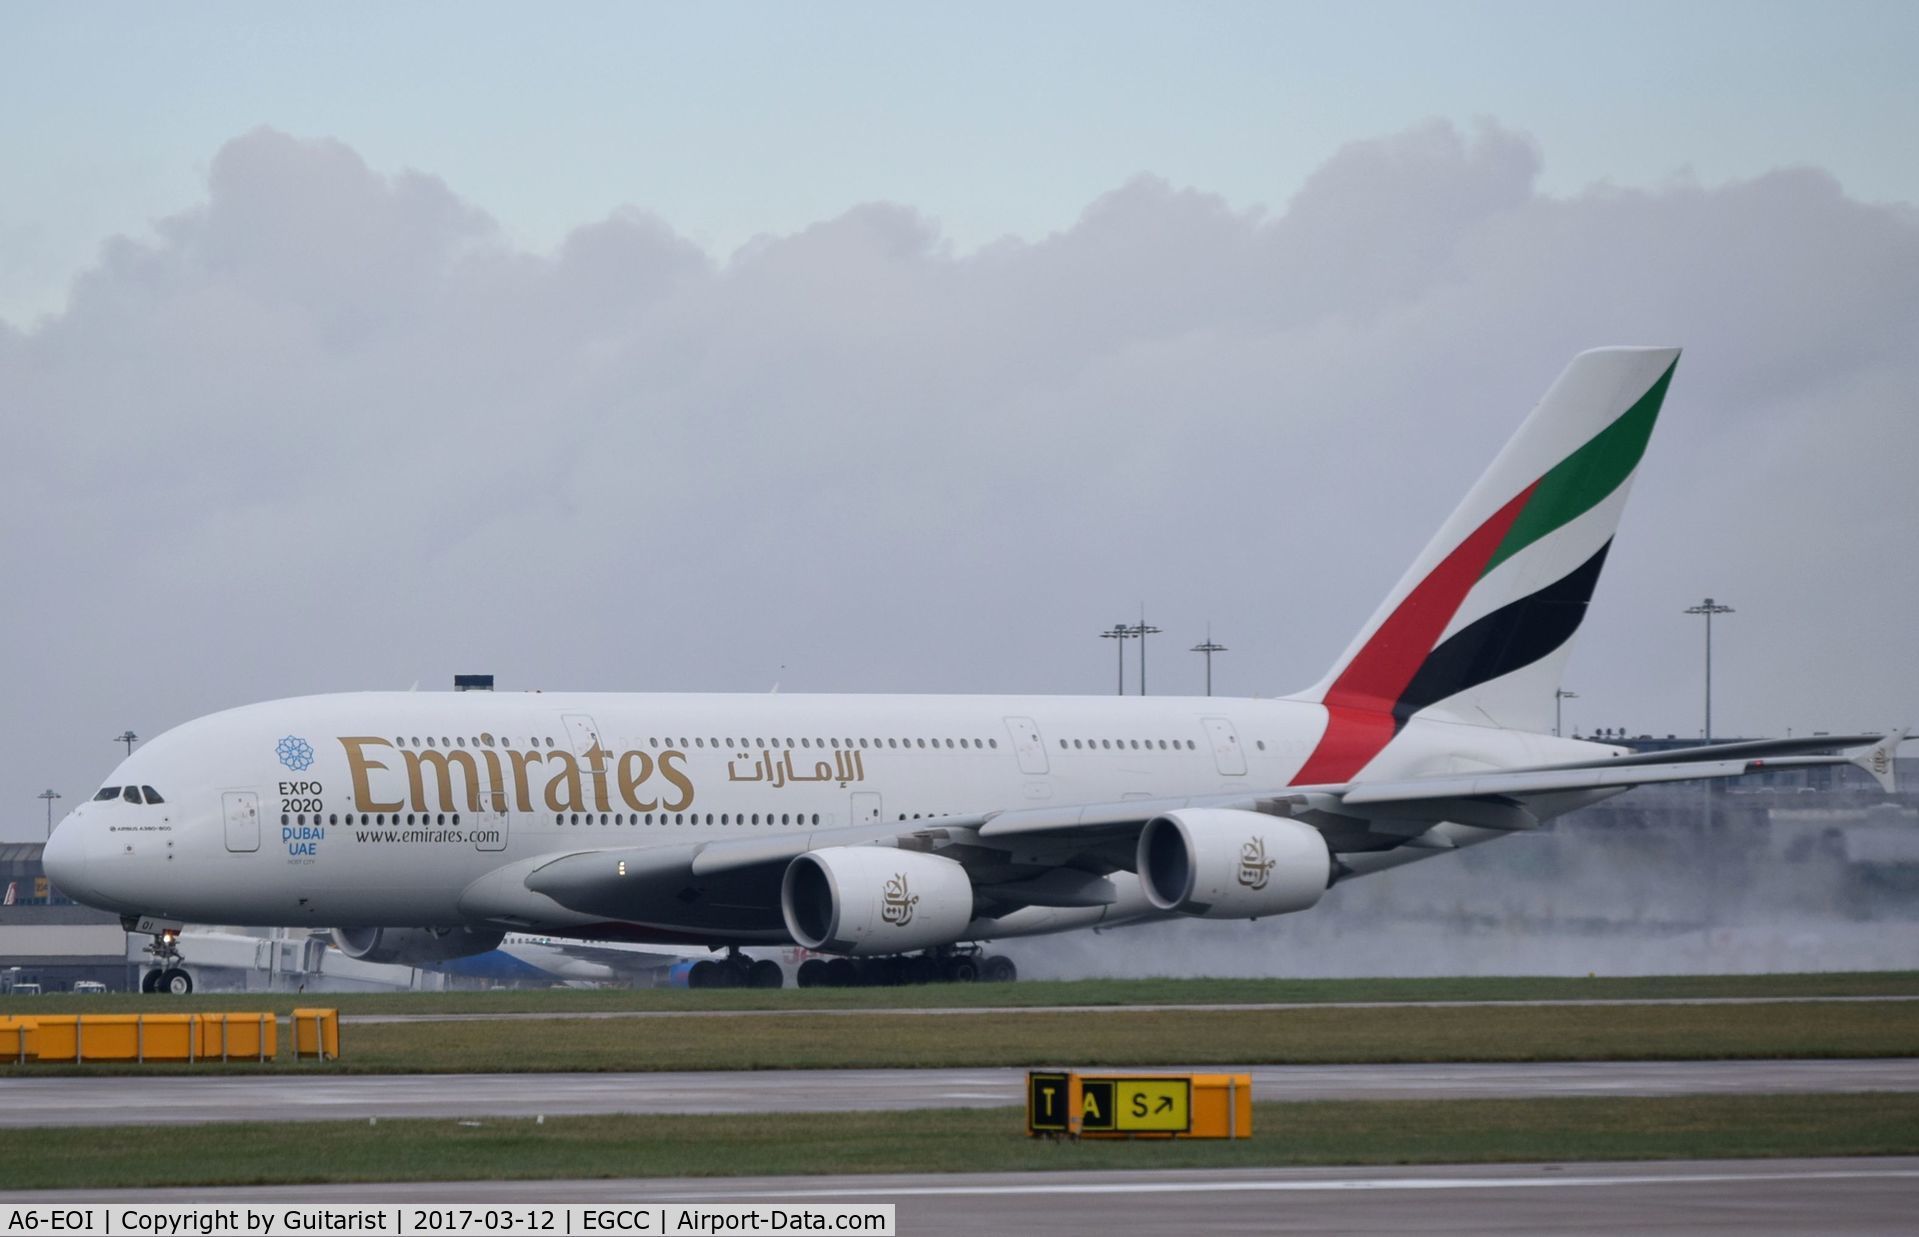 A6-EOI, 2014 Airbus A380-861 C/N 178, At Manchester